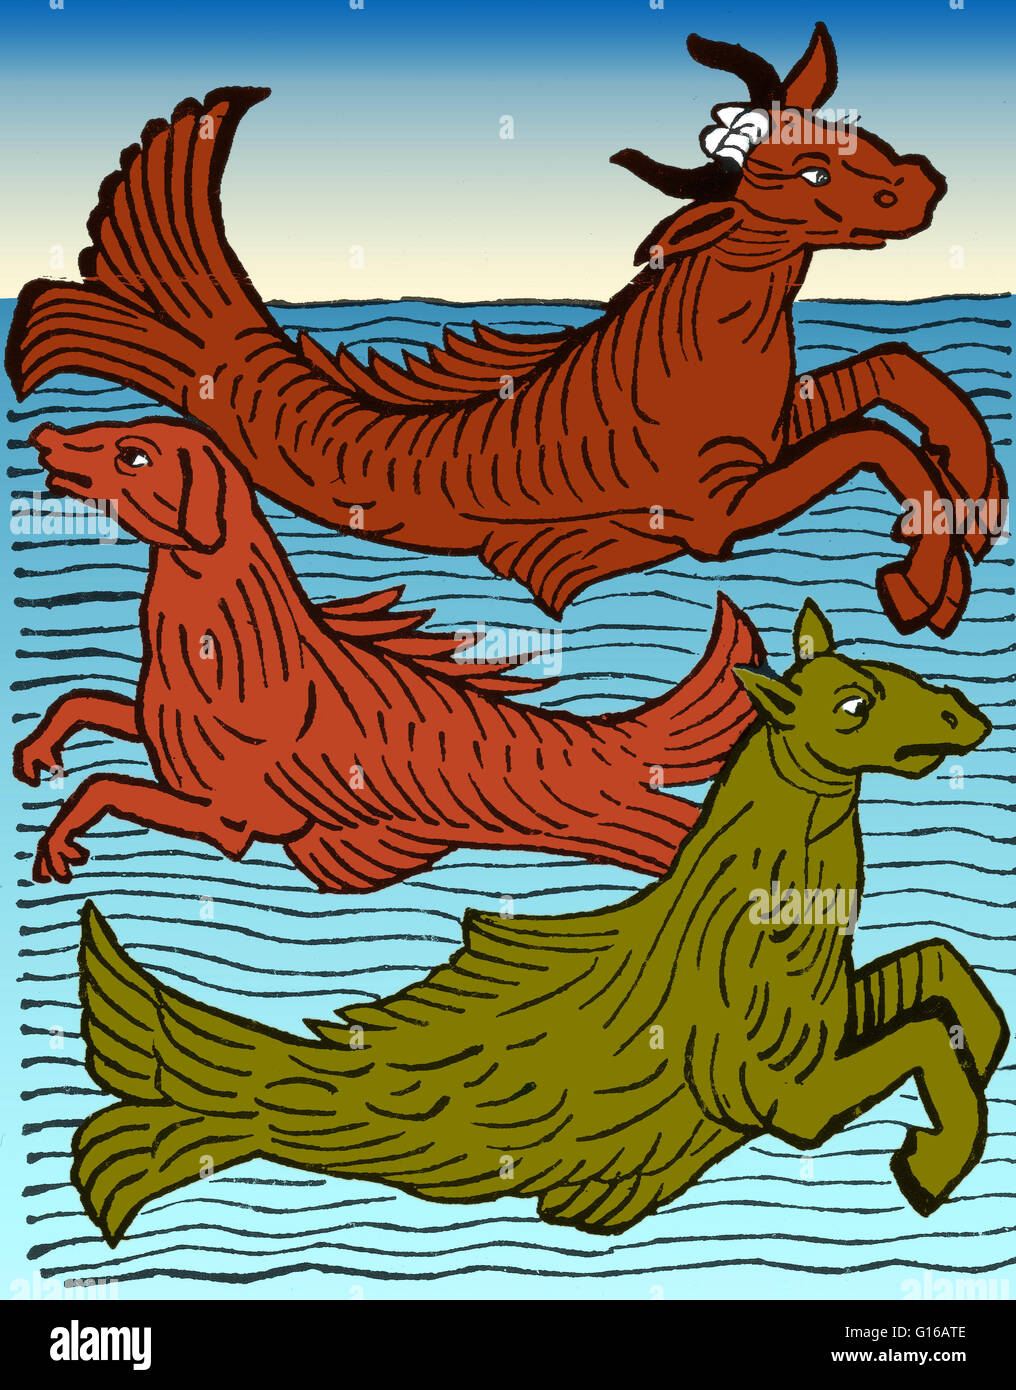 Woodcut of three mythical sea creatures (a sea cow, sea dog, and sea horse) from Hortus Sanitatis printed by Jacob Meyderbach, 1491. Small sharks were given the name sea dogs or dogfish, because they have sharp teeth, and popular imagination made them the Stock Photo